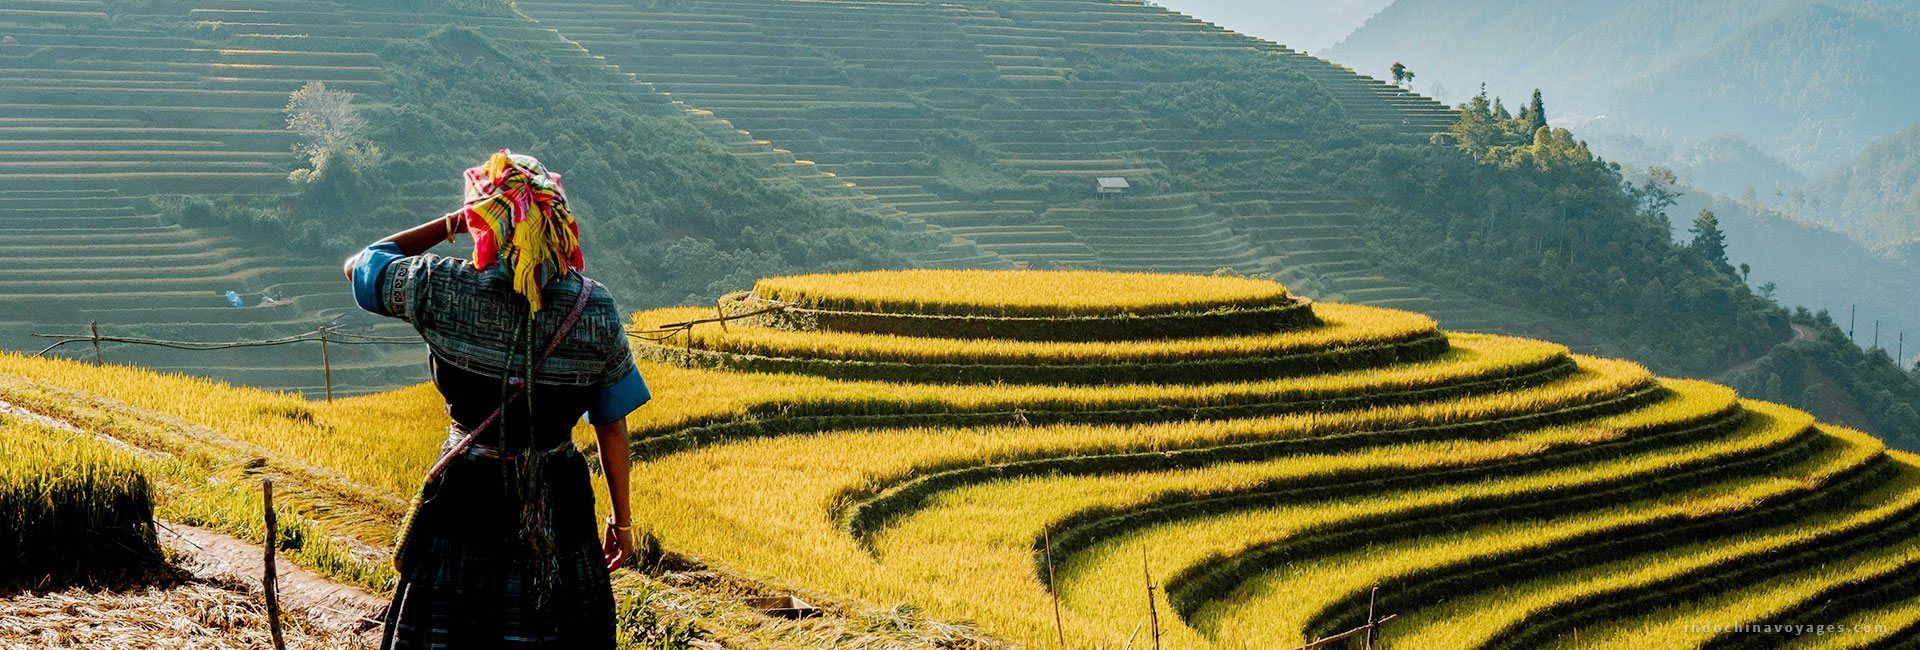 How to Plan a Trip to Vietnam? Insider Tips for an Authentic Experience